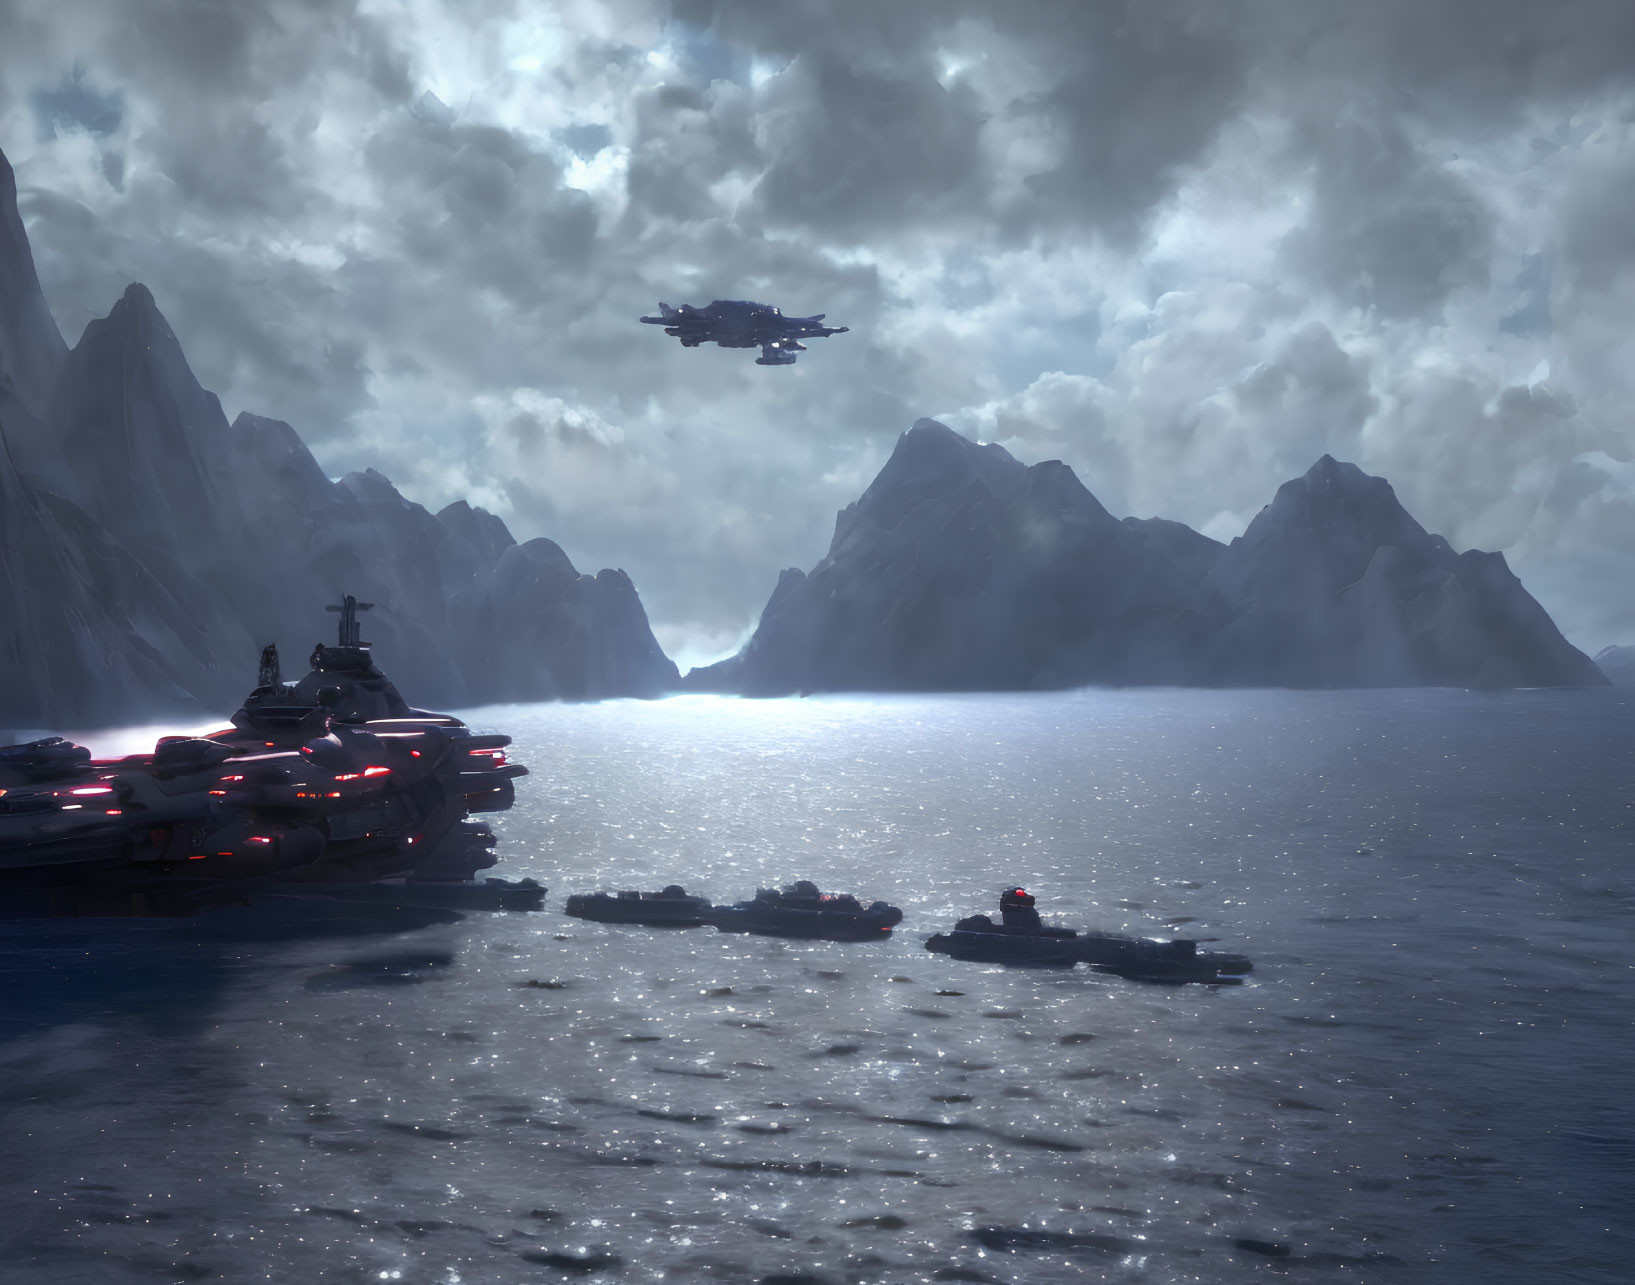 Futuristic naval fleet and flying craft over icy waters and snow-covered mountains